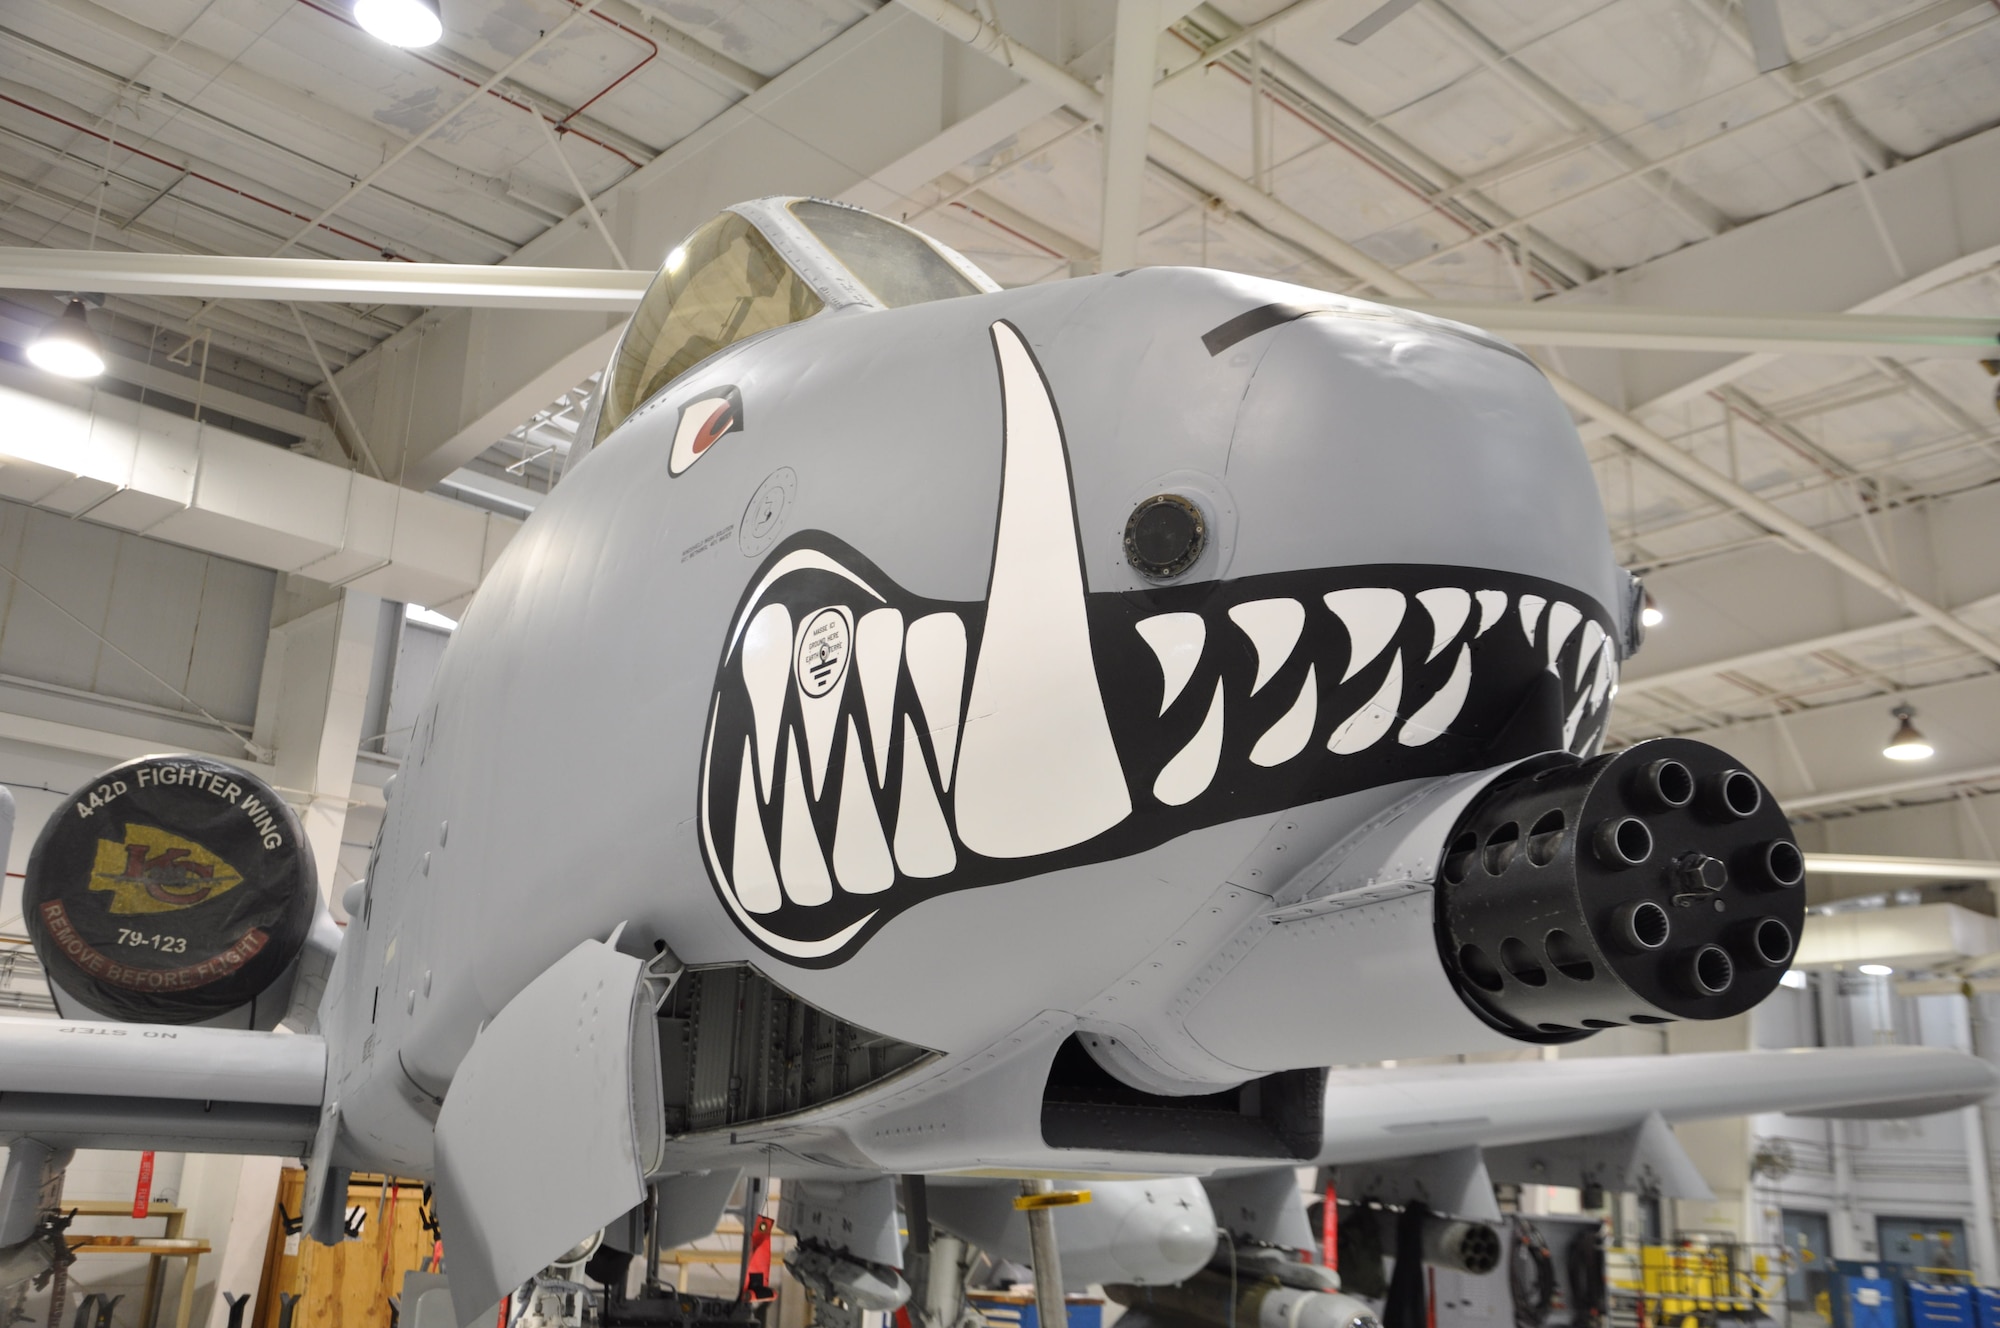 Aircraft 79-123 is the first A-10 Thunderbolt II flying out of the 442d Fighter Wing at Whiteman Air Force Base, Mo., to receive teeth on 13 May. The design was initiated by Senior Airman Spencer Stringer, an aircraft structural maintenance technician. The design was created by Stringer, and his supervisor Master Sgt. Geary Rose.